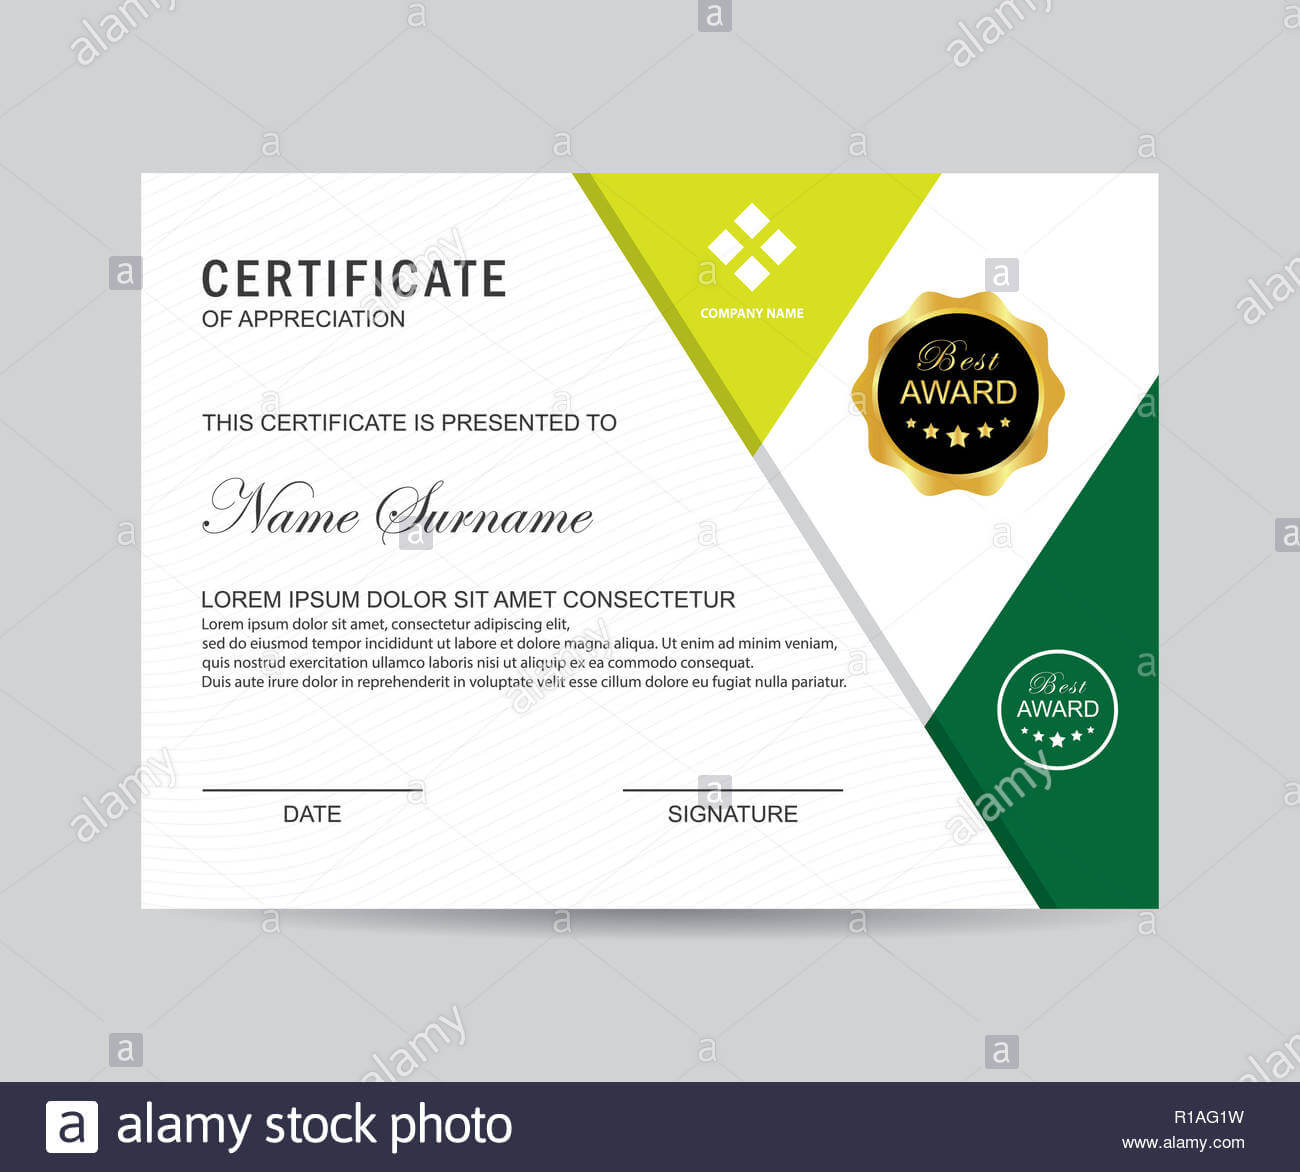 Modern Certificate Template And Background Stock Photo Pertaining To Borderless Certificate Templates